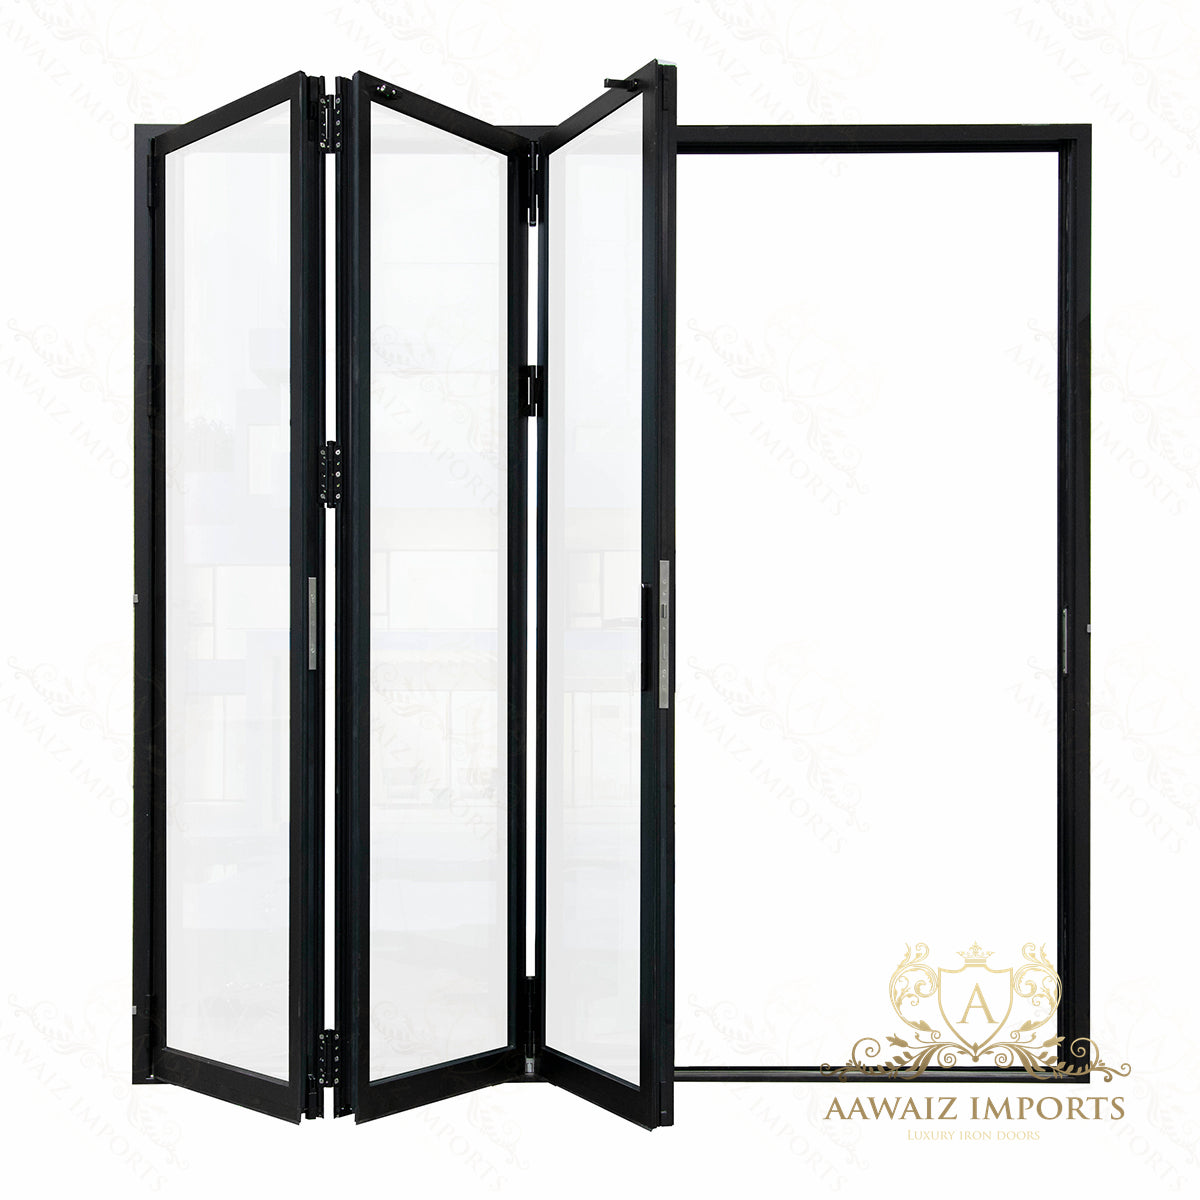 8 Ft Wide By 8 Ft Tall (96" By 96") Aluminum Bi Fold Patio Door Outswing  Thermal Break Insulated Matt Black Finish